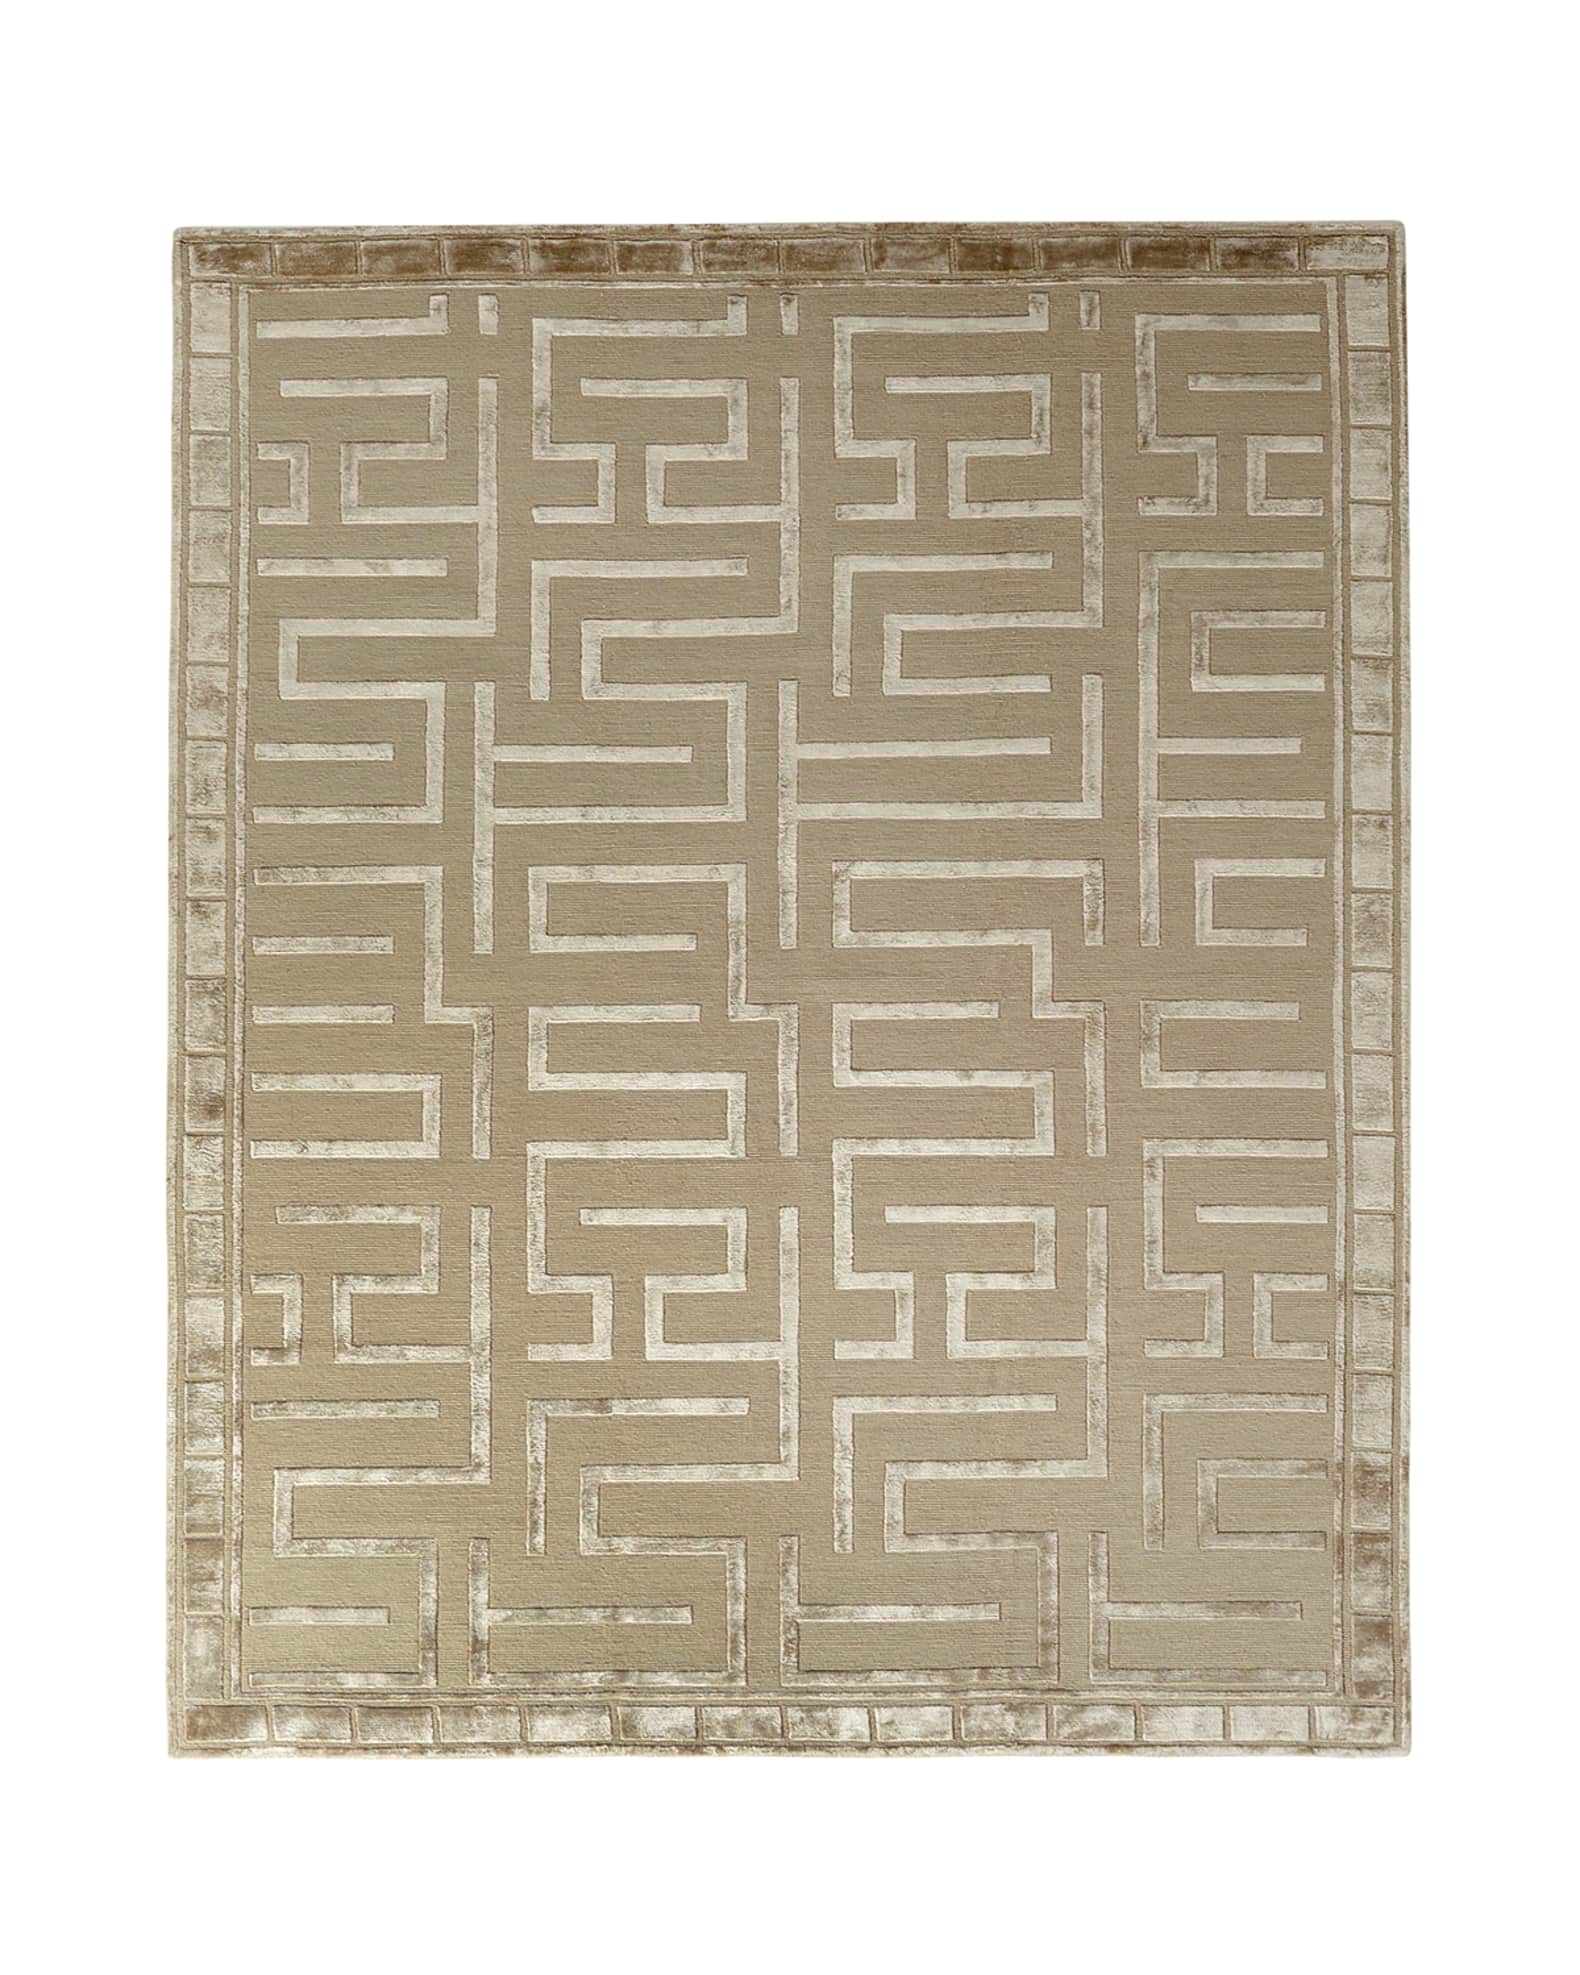 Exquisite Rugs Rowling Maze Hand-Knotted Rug, 6' x 9'